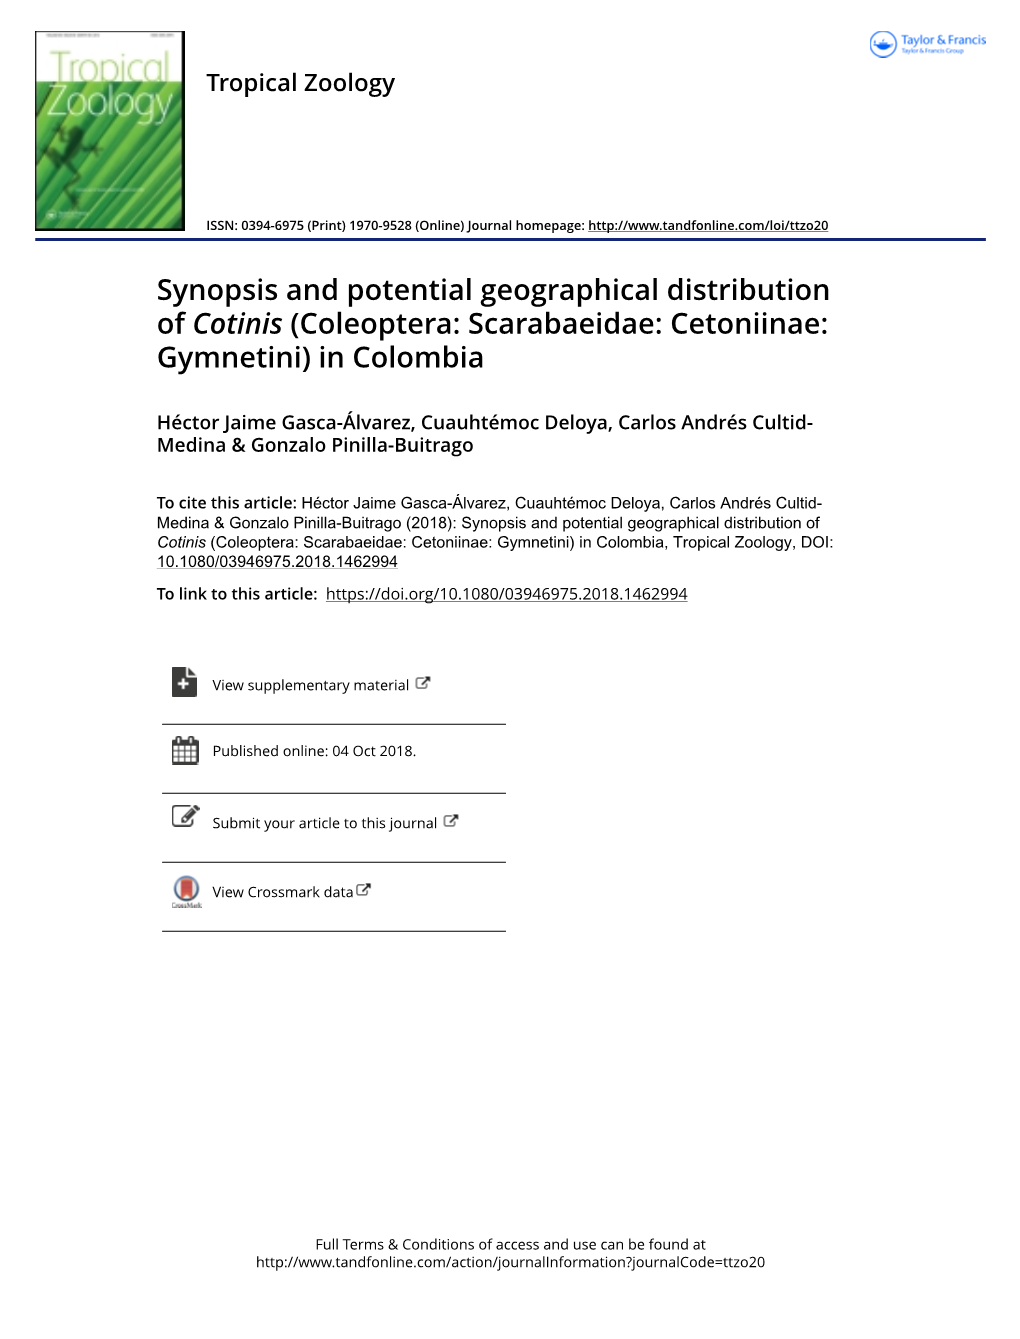 Synopsis and Potential Geographical Distribution of Cotinis (Coleoptera: Scarabaeidae: Cetoniinae: Gymnetini) in Colombia